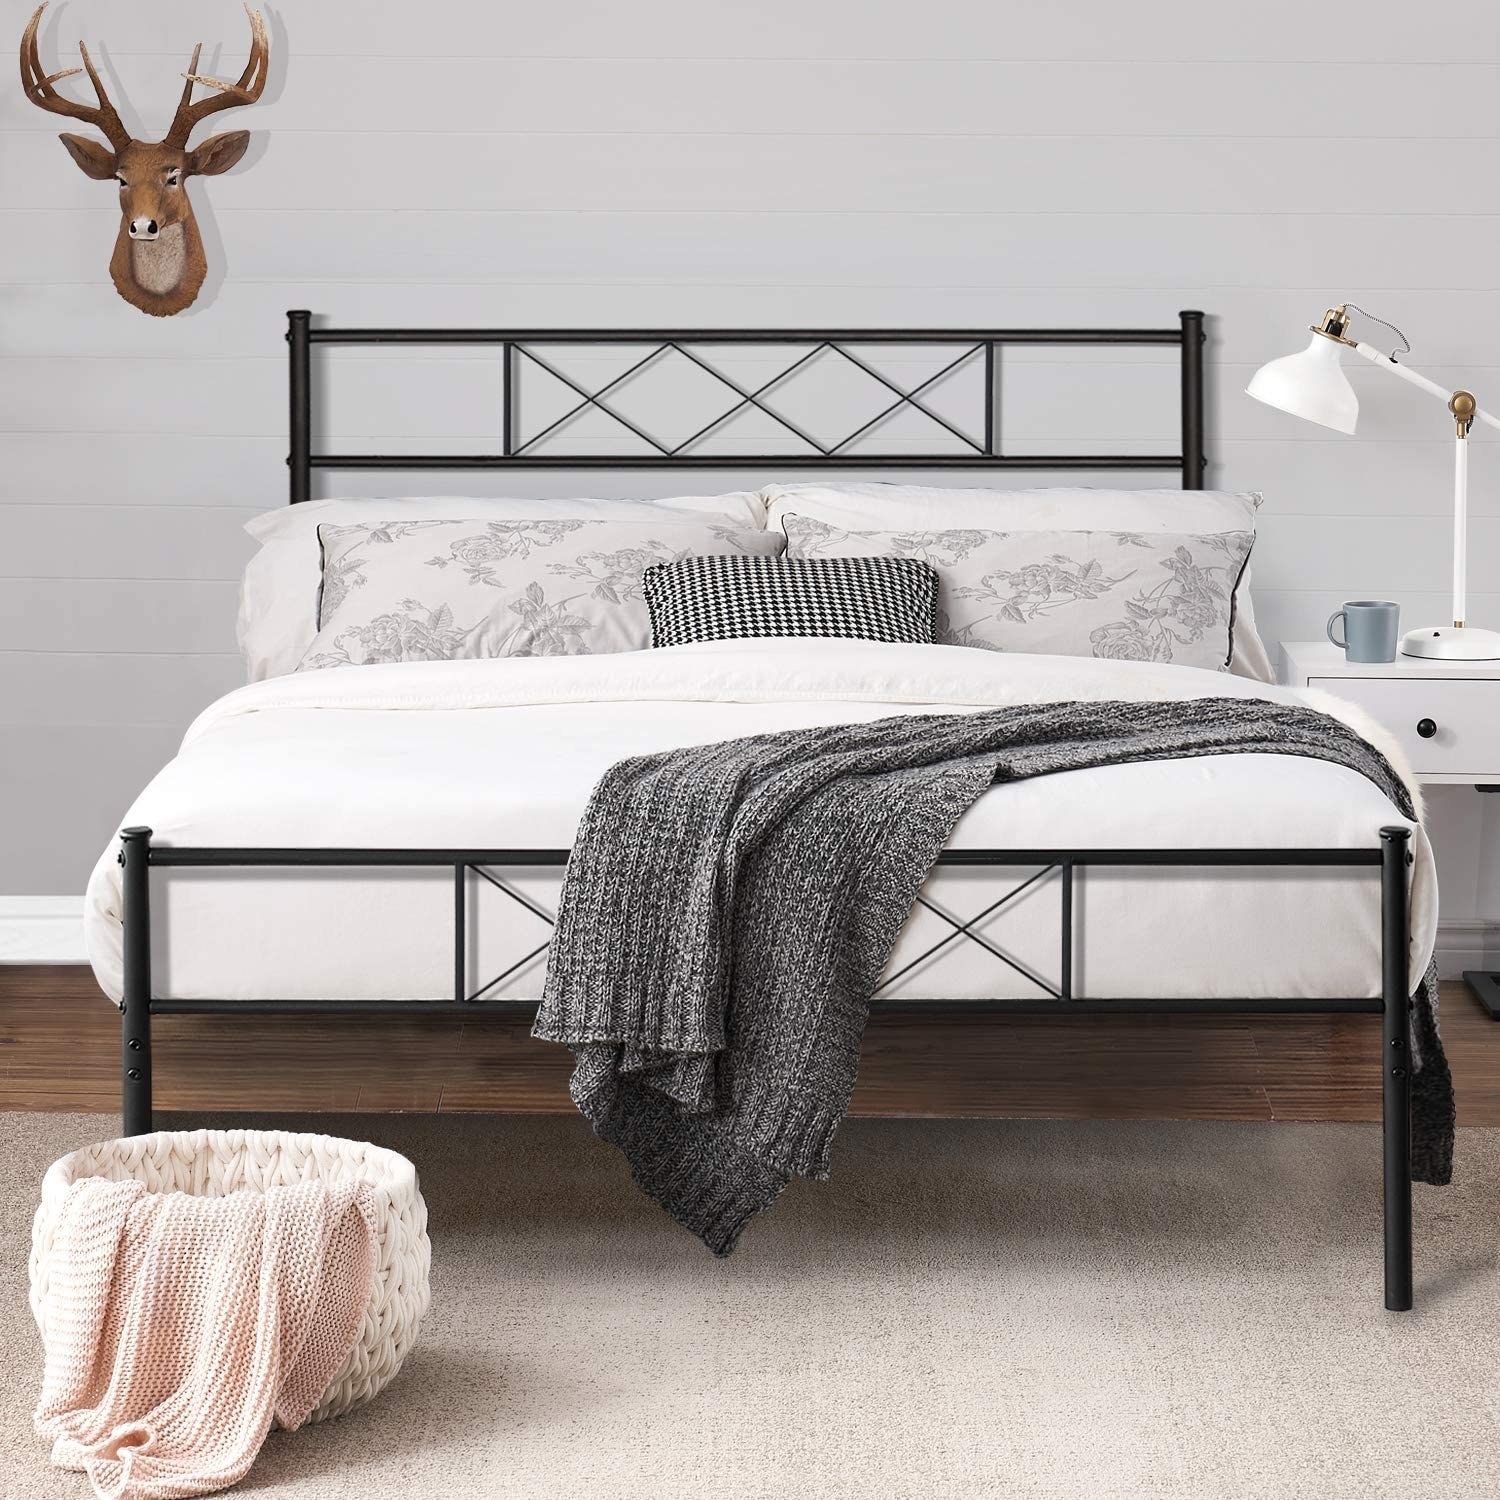 27 Bed Frames That Only Look, How Much Is A Good Bed Frame